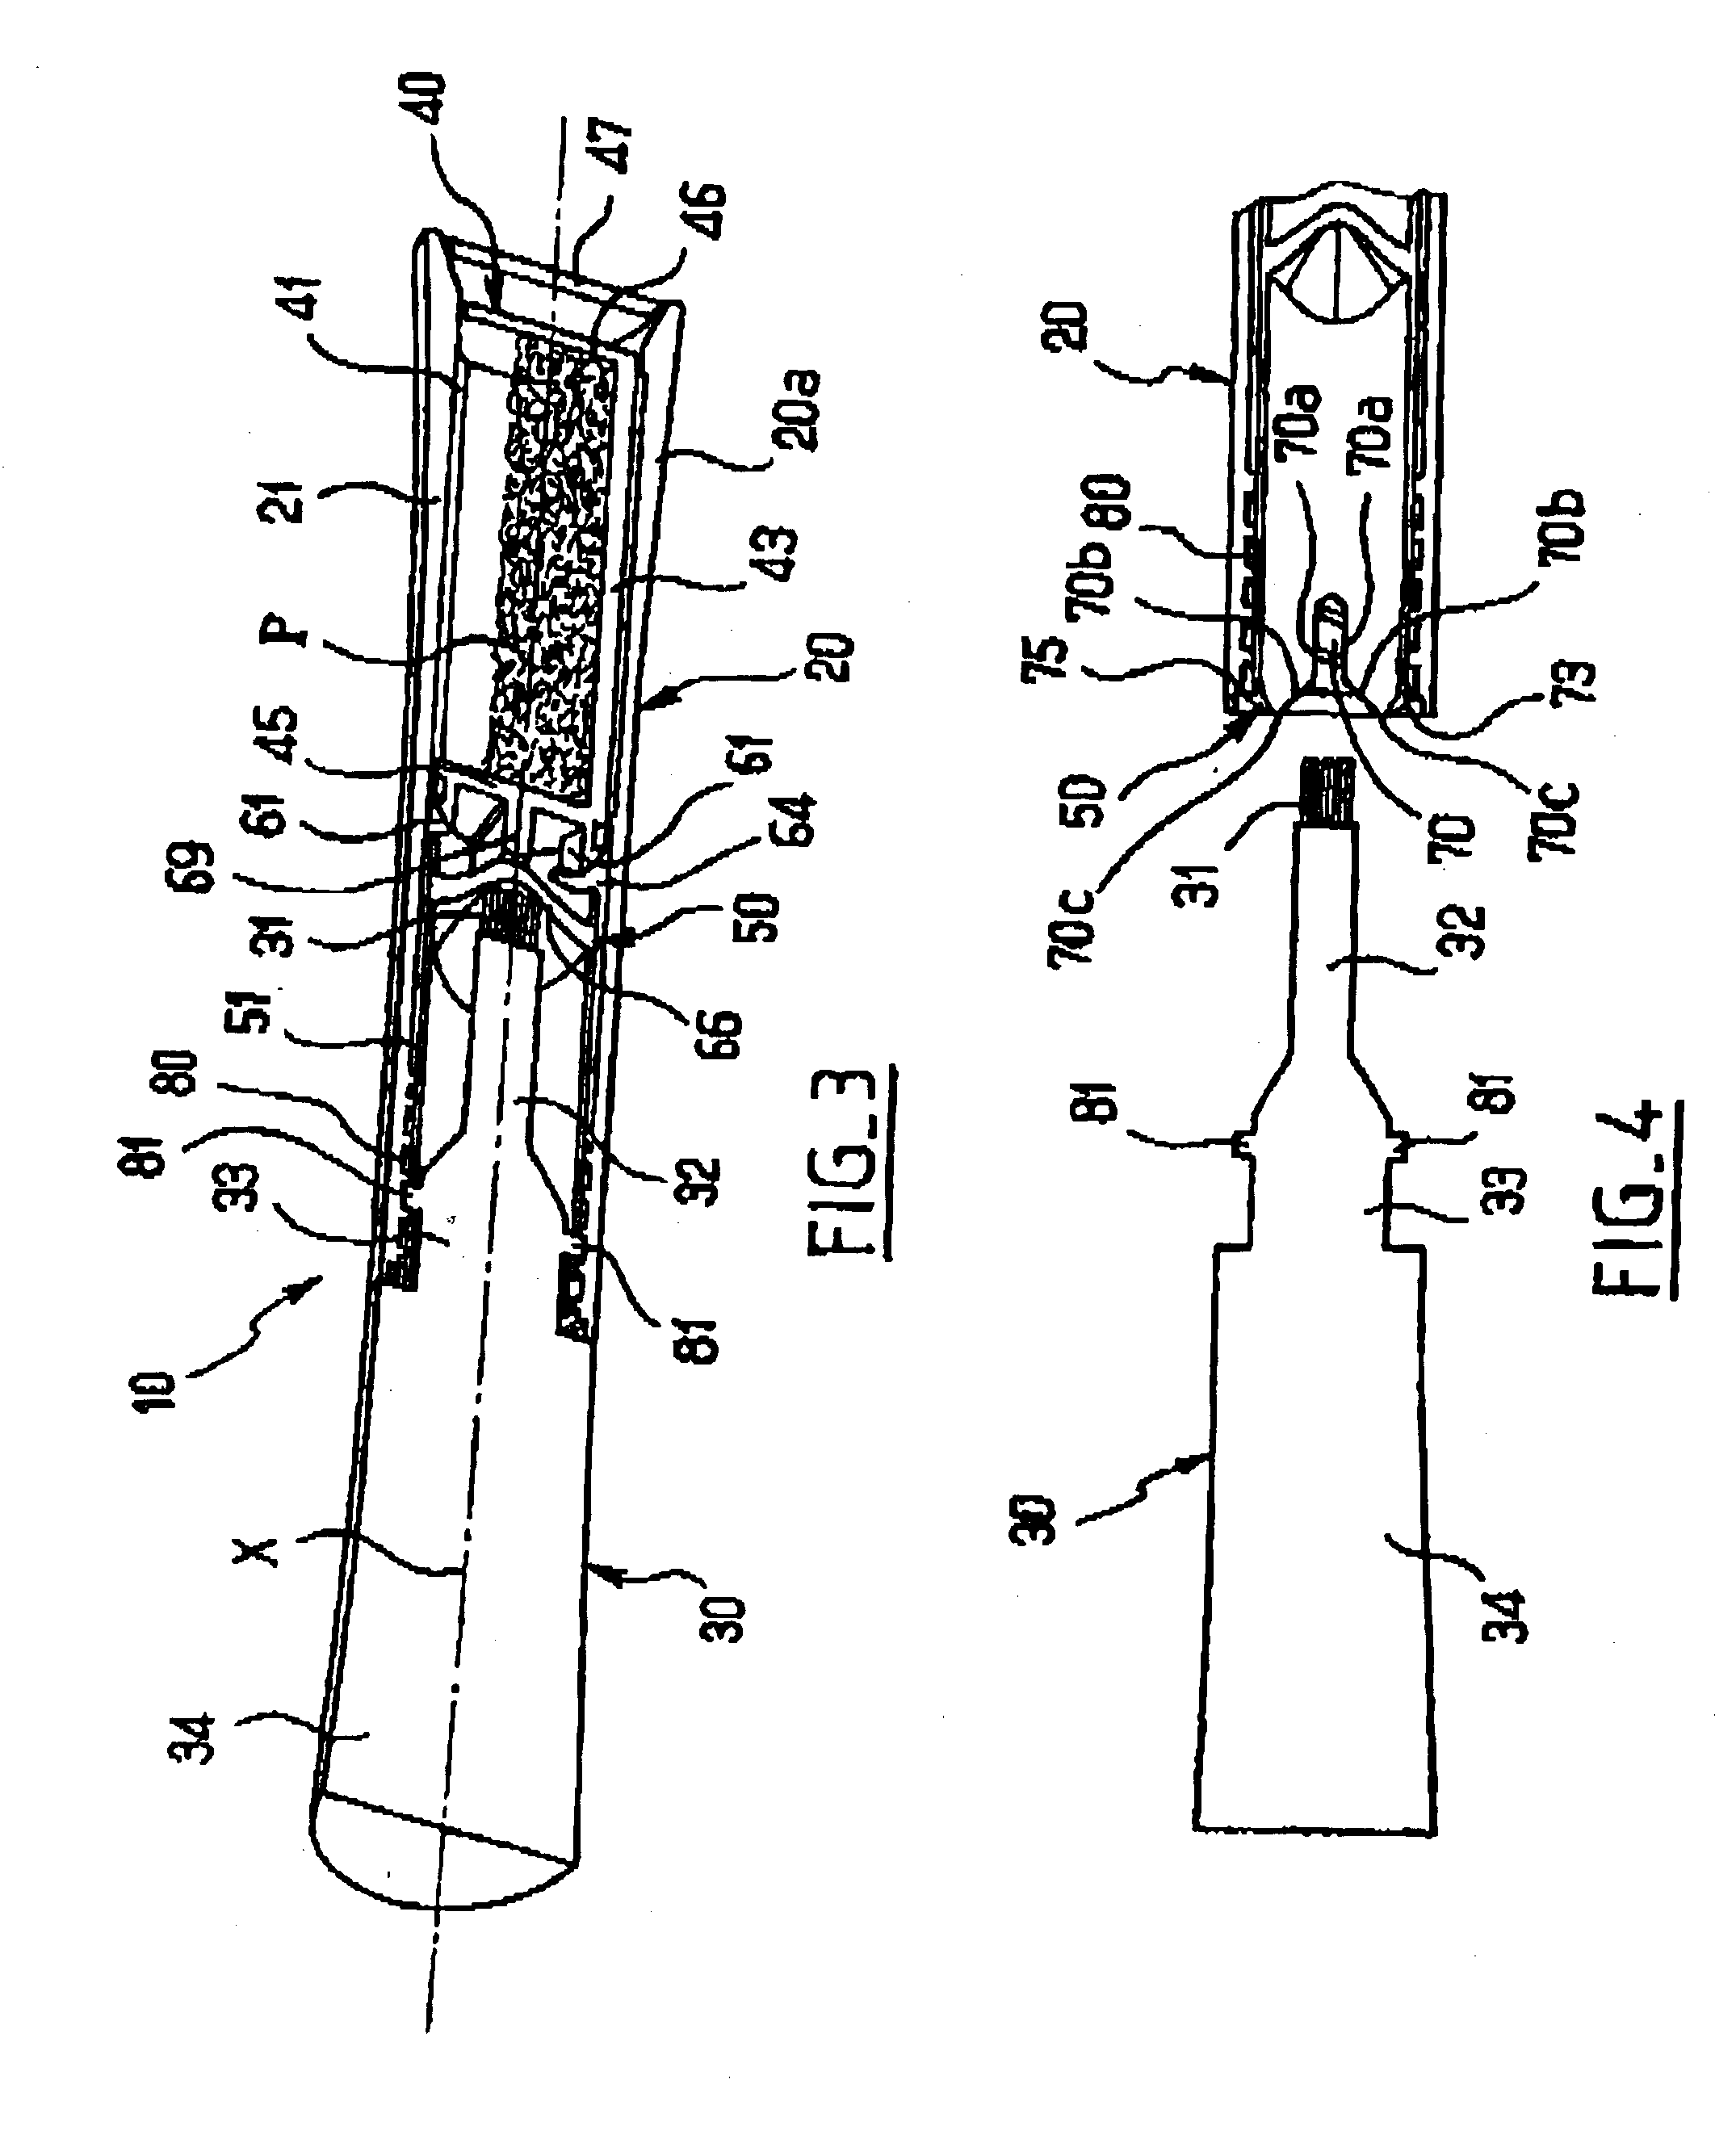 Device comprising a case and an applicator